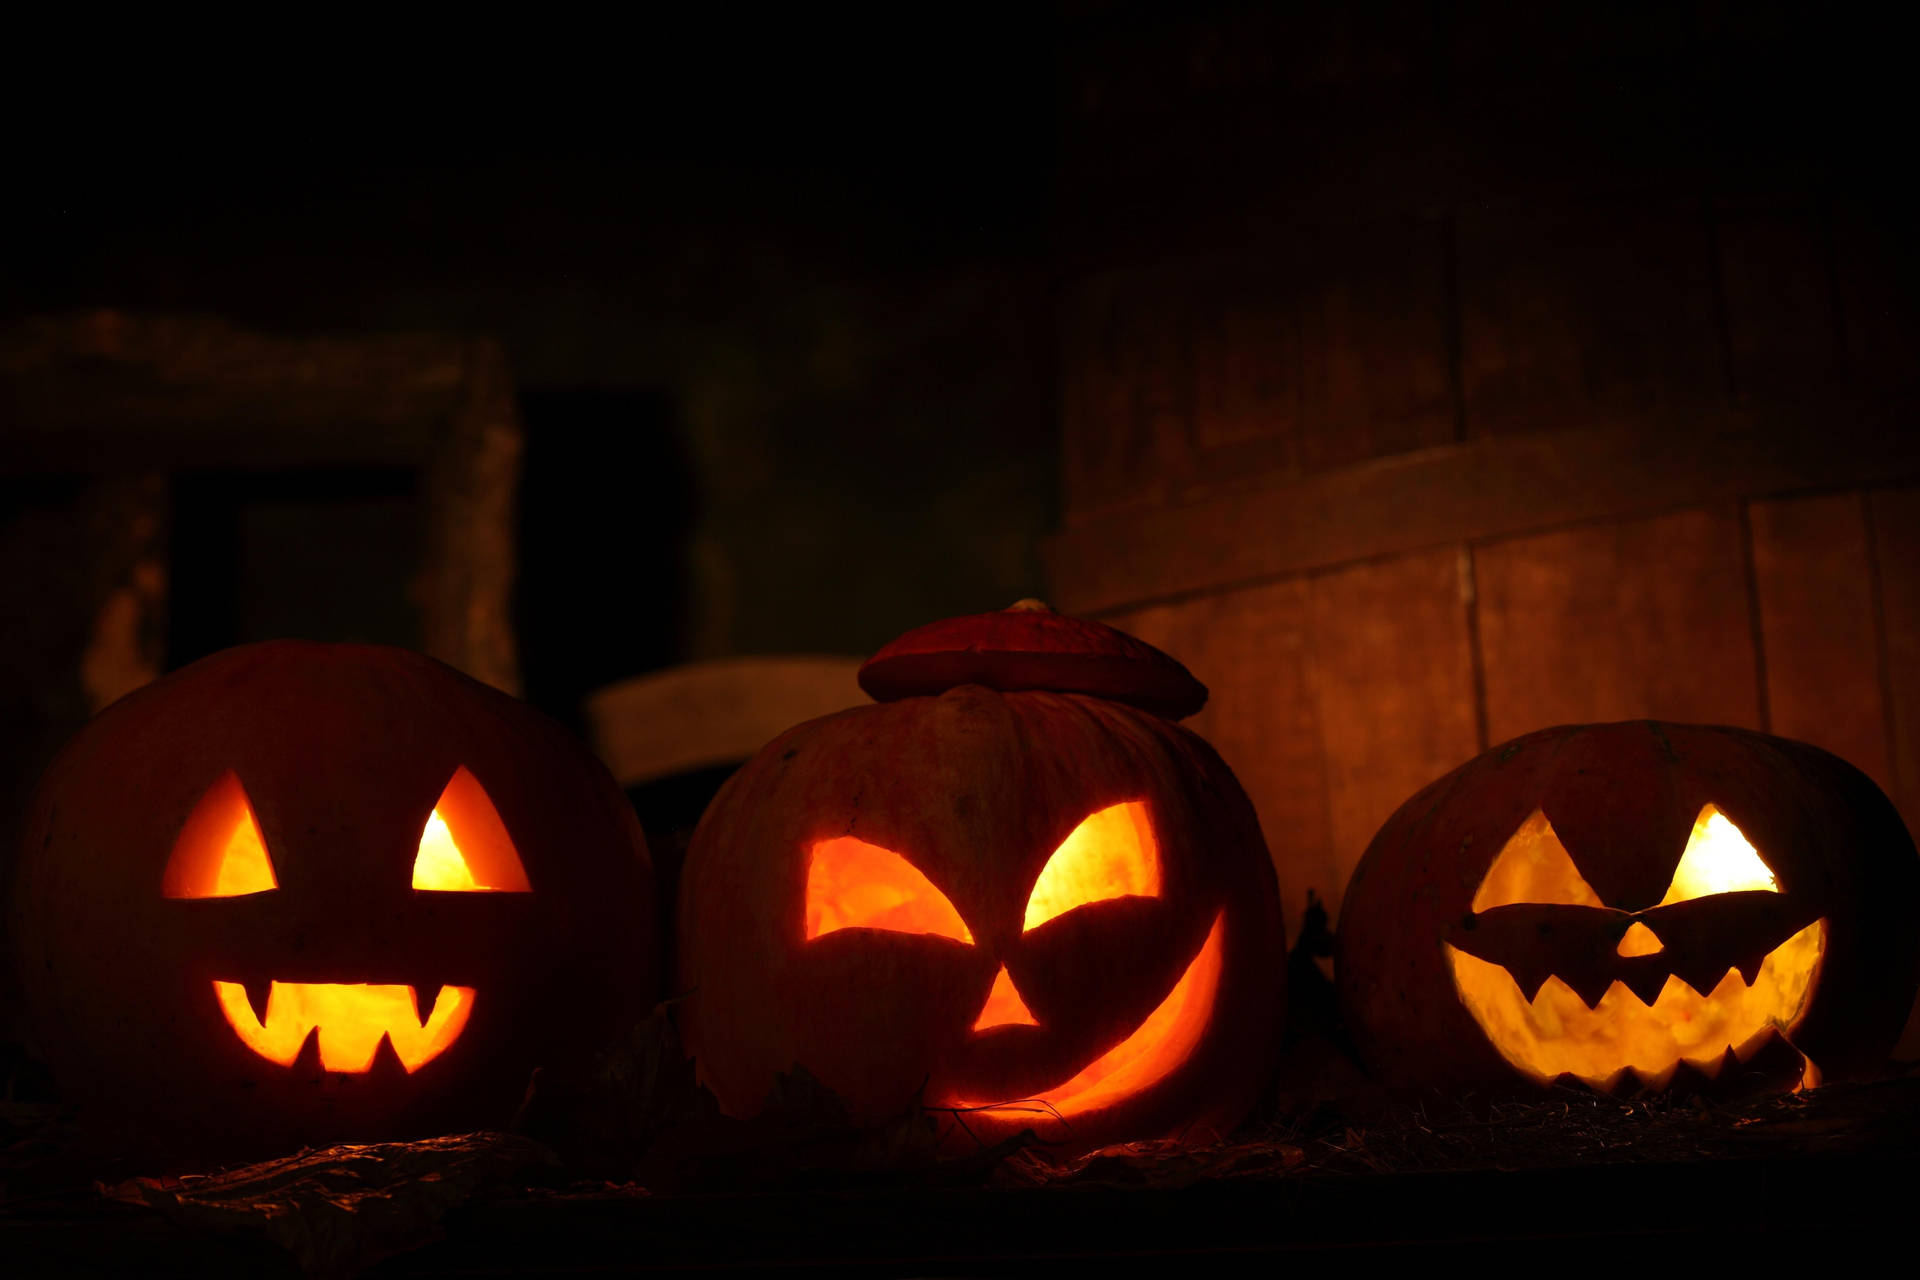 'Just in time for Halloween, carved pumpkins illuminated by a full moon' Wallpaper